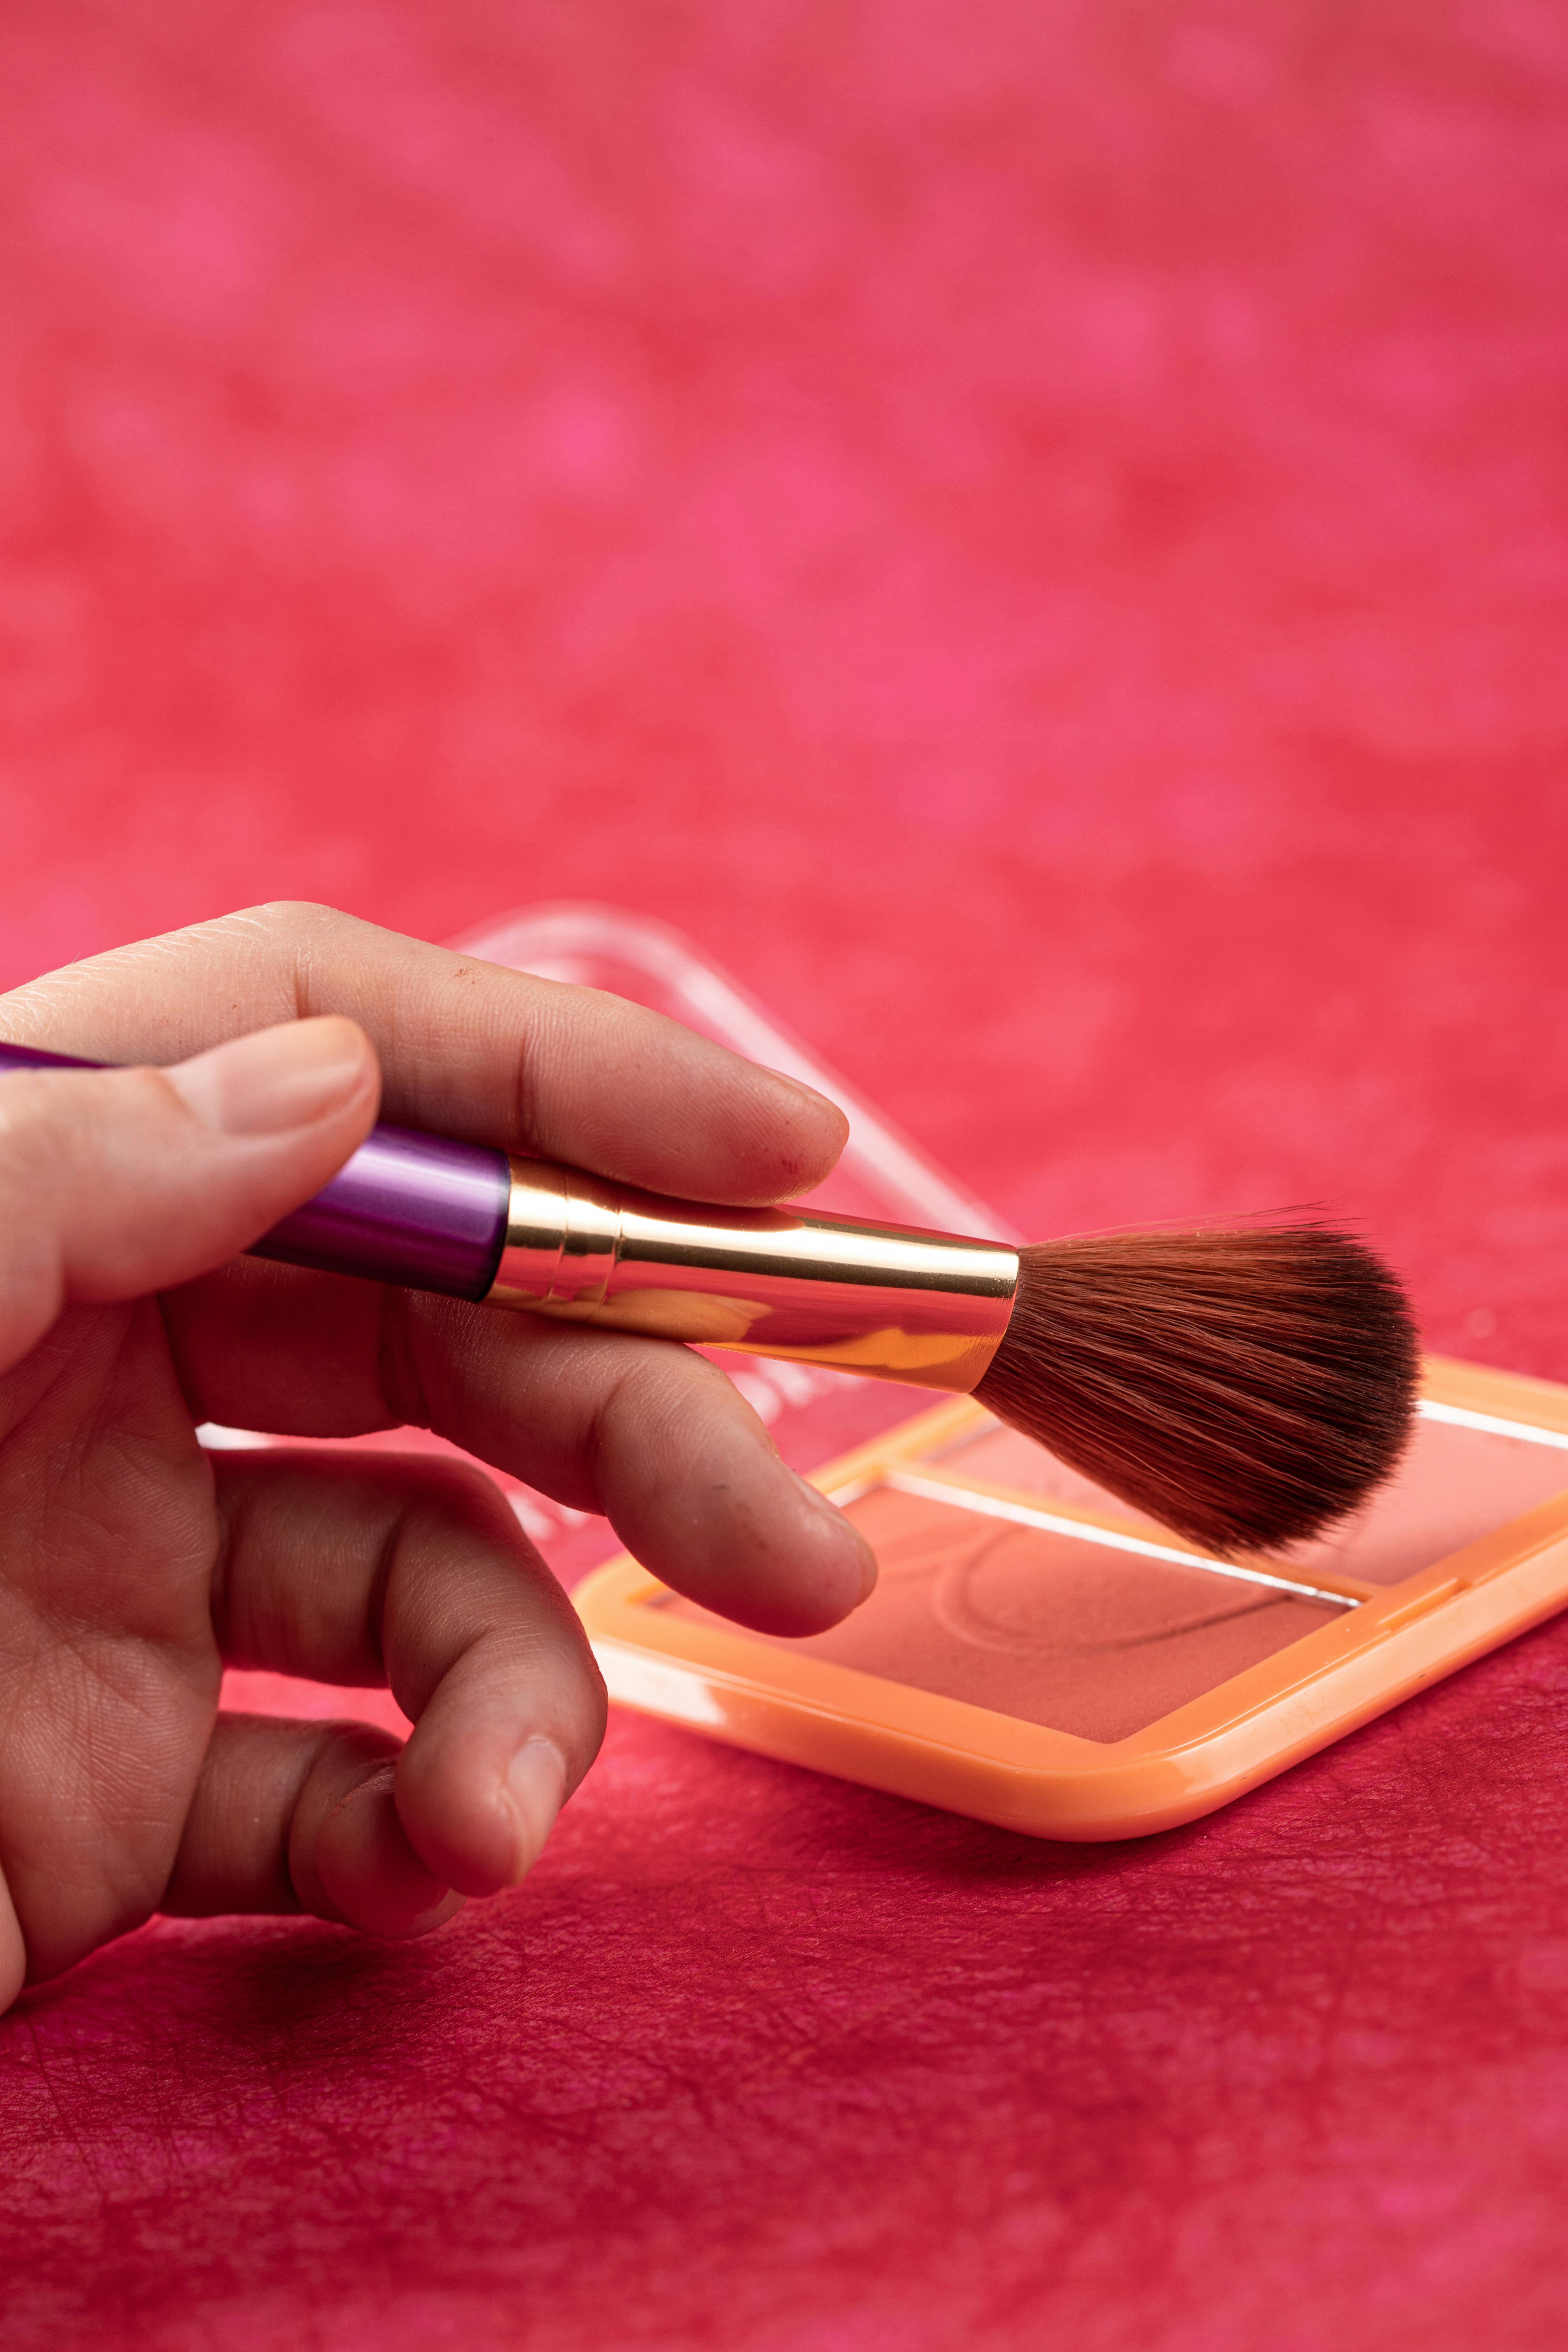 person holding black and brown makeup brush